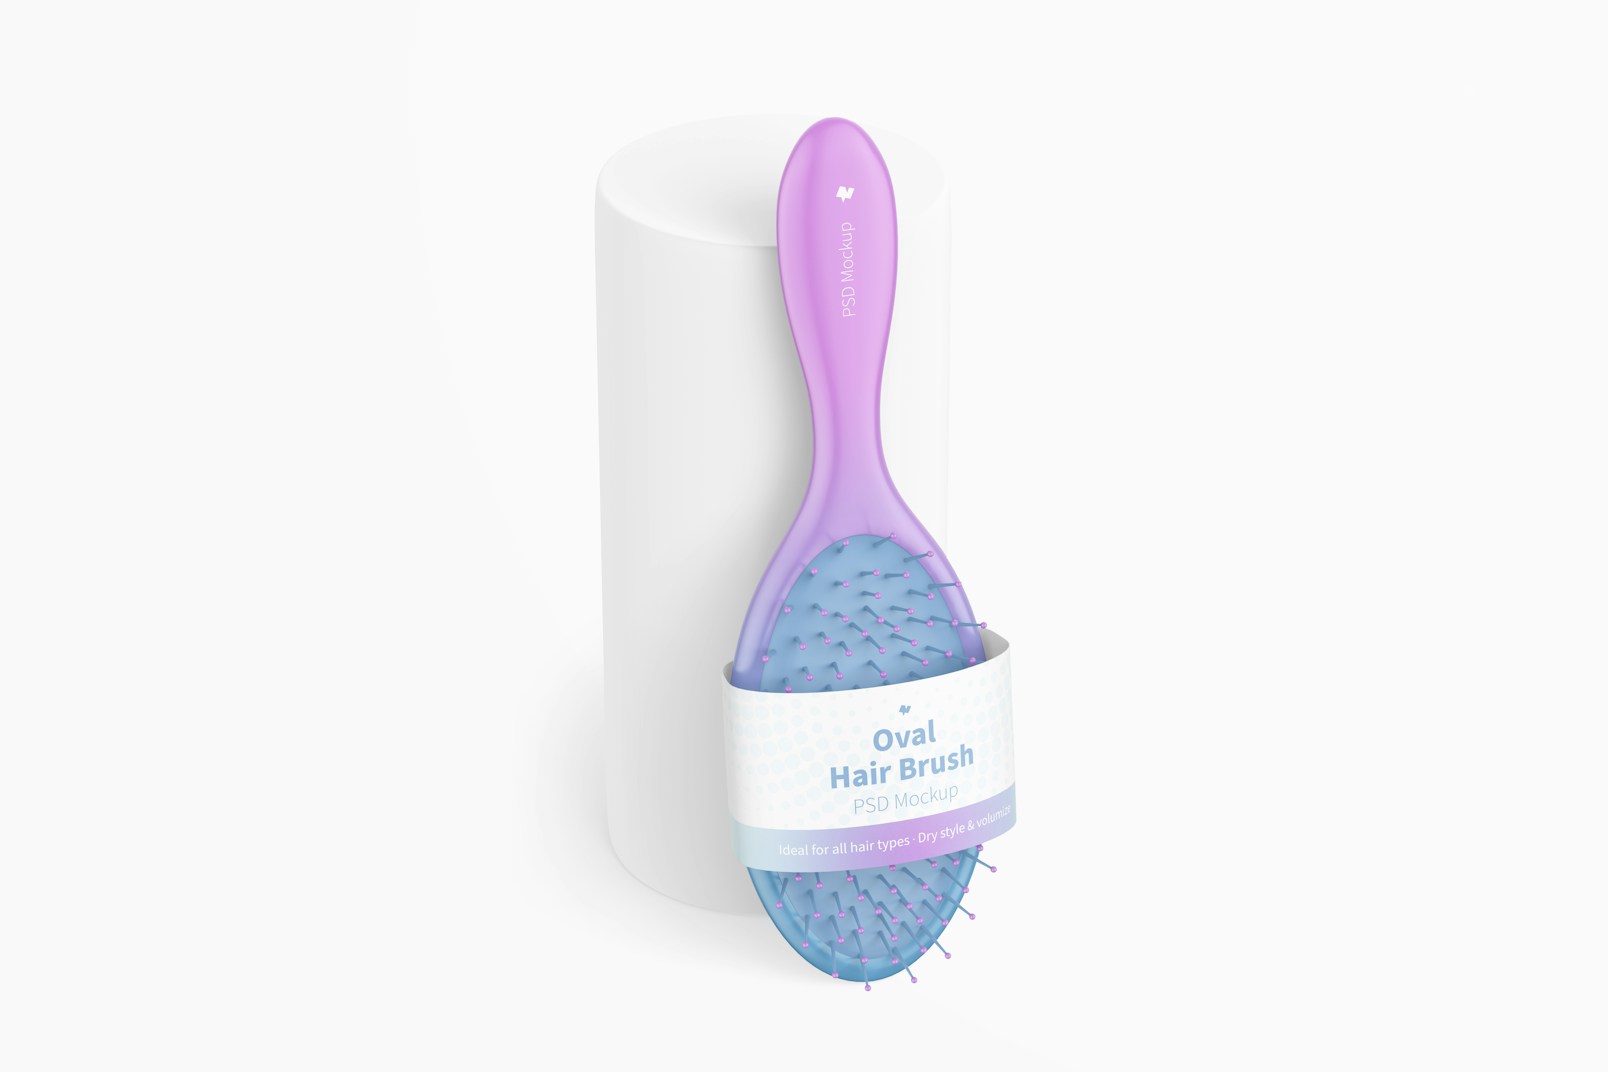 Oval Hair Brush with Label Mockup, Leaned